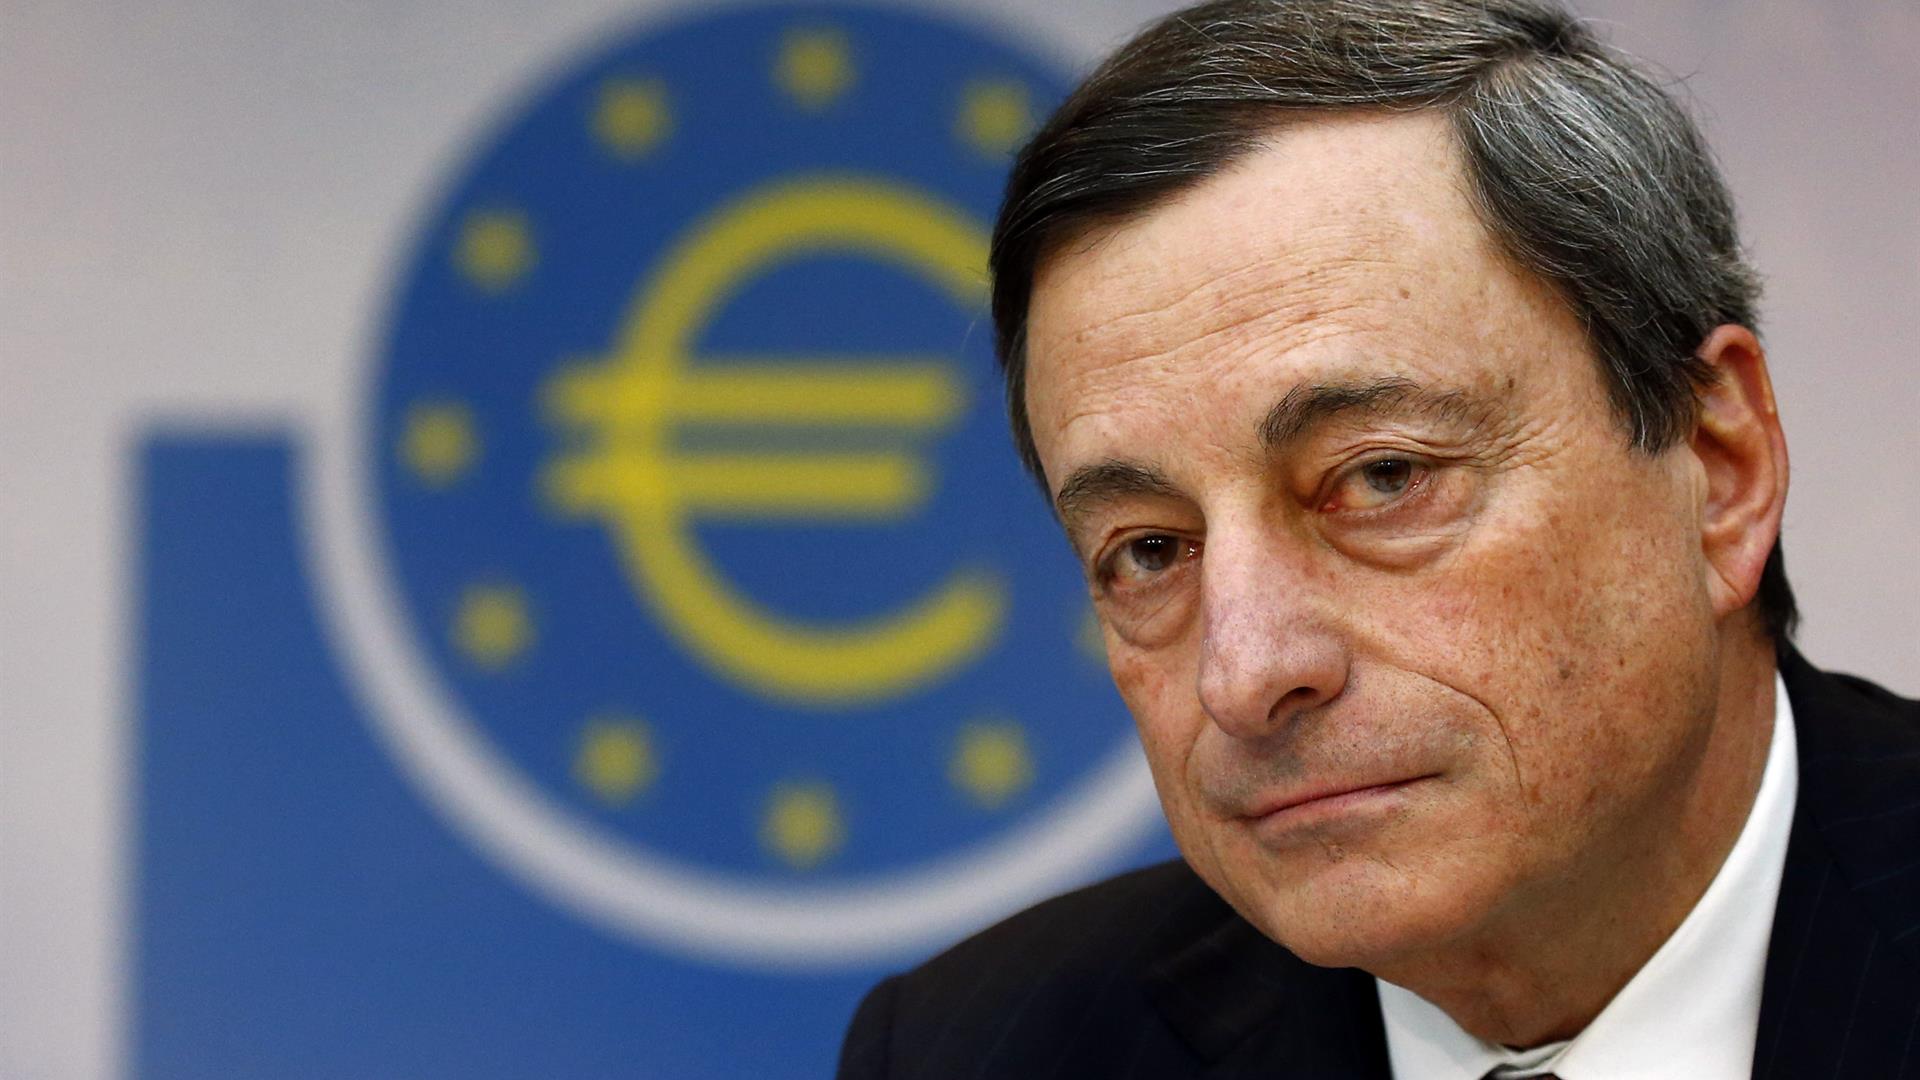 Draghi Studies Fed Exit as ECB’s Guide on What to Do and Avoid